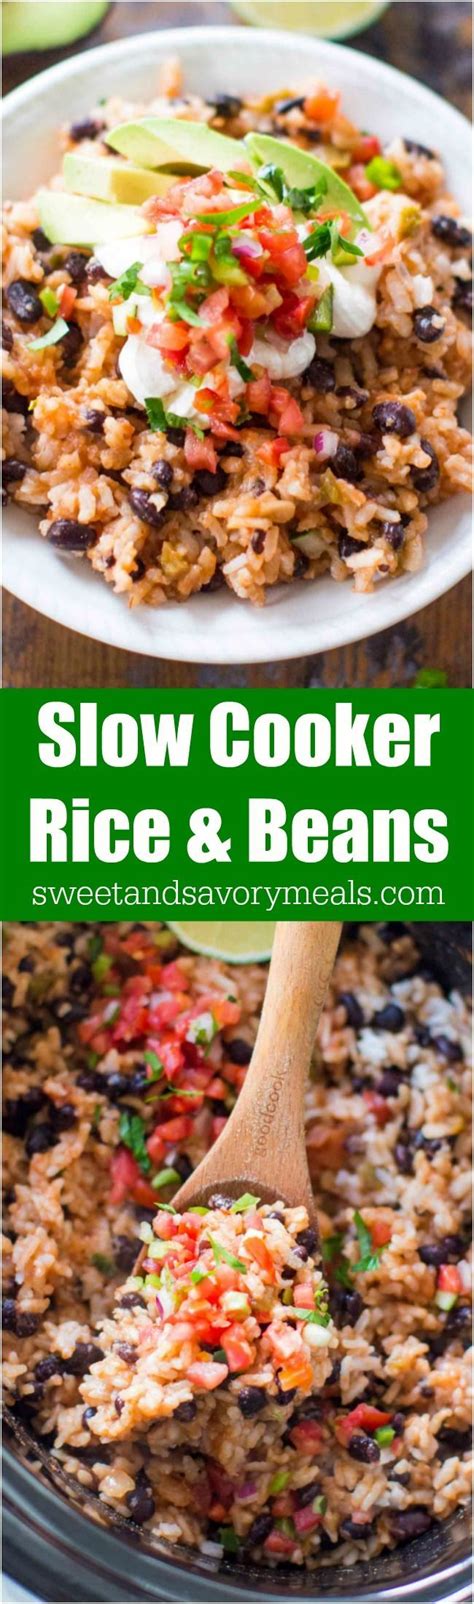 Use for tacos, burritos, enchiladas and more! Slow Cooker Rice and Beans is the perfect side dish or vegetarian meal you can make in the slow ...